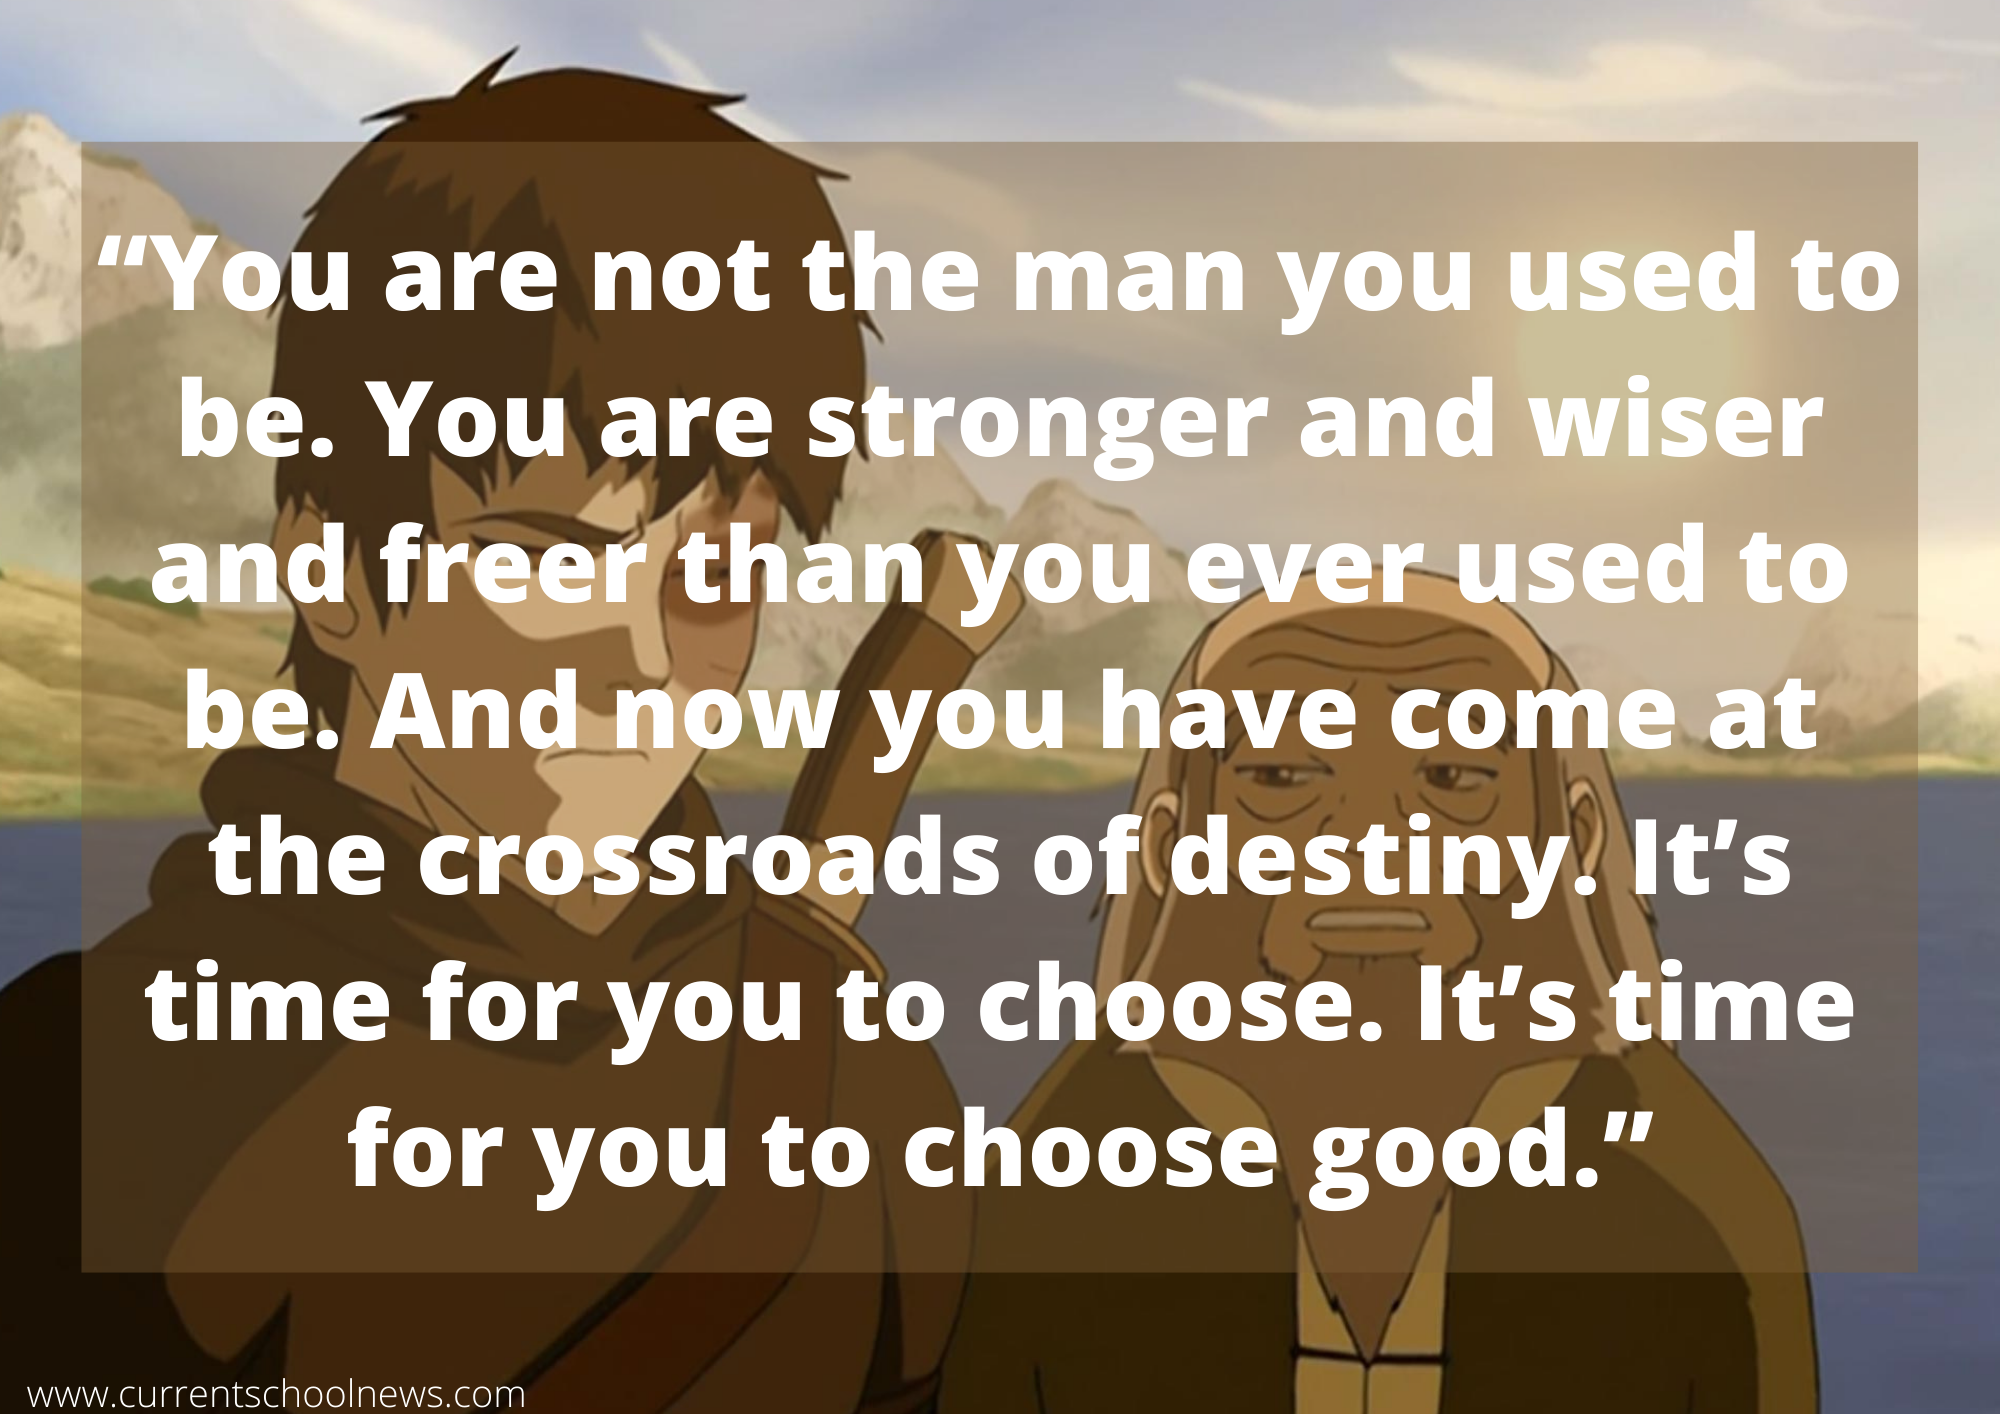 Best Uncle Iroh quotes from the Avatar The Last Airbender  Legitng